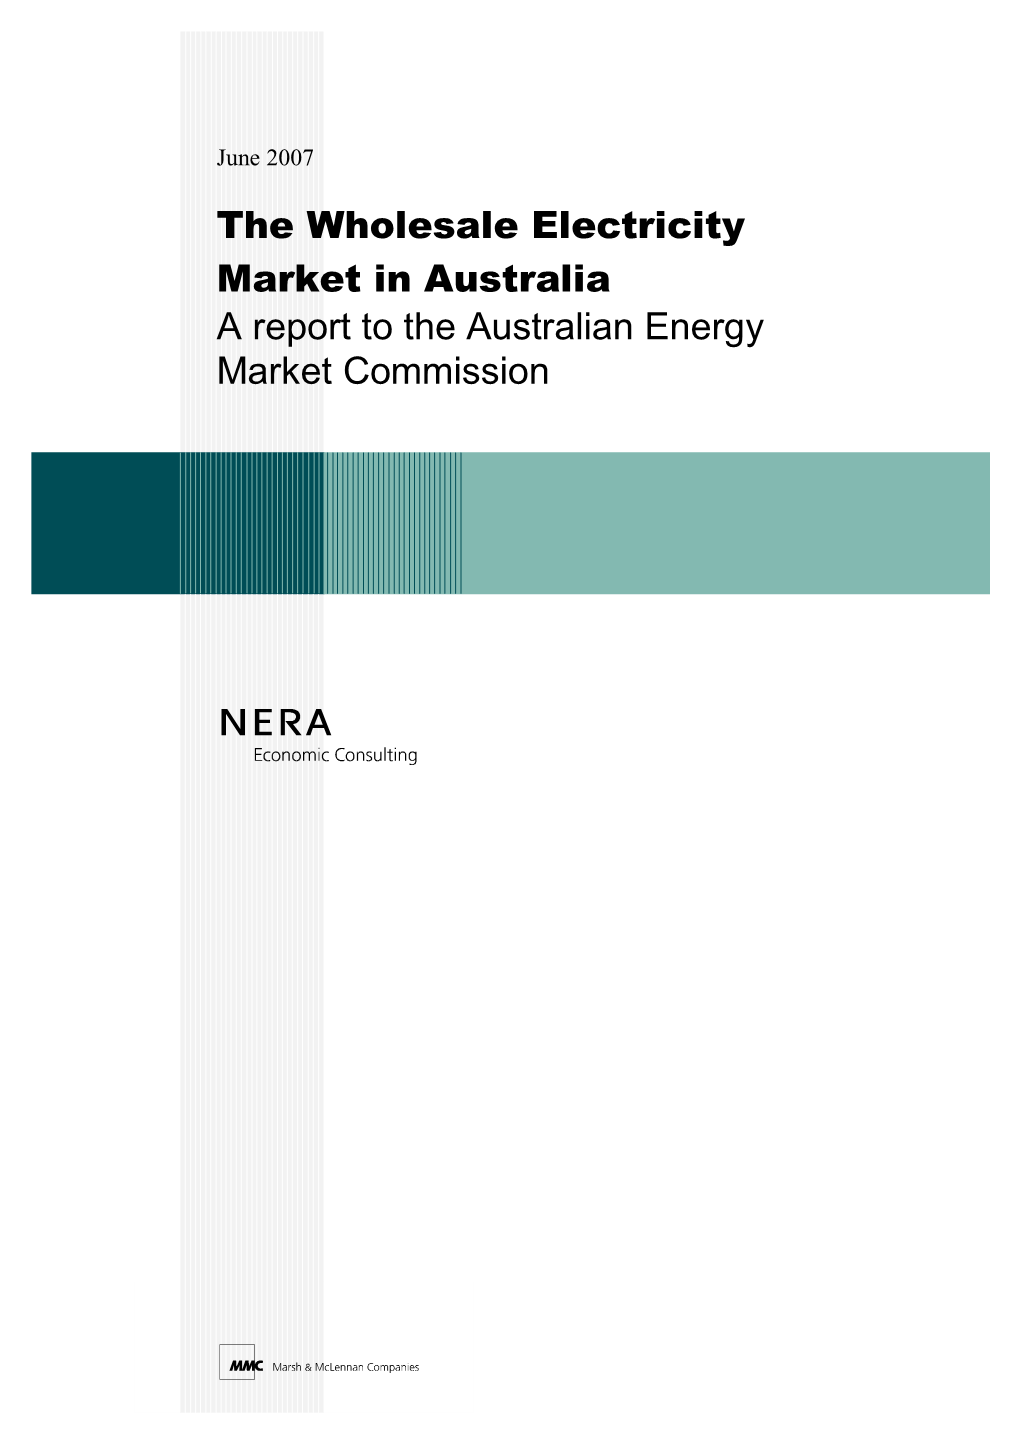 The Wholesale Electricity Market in Australia a Report to the Australian Energy Market Commission